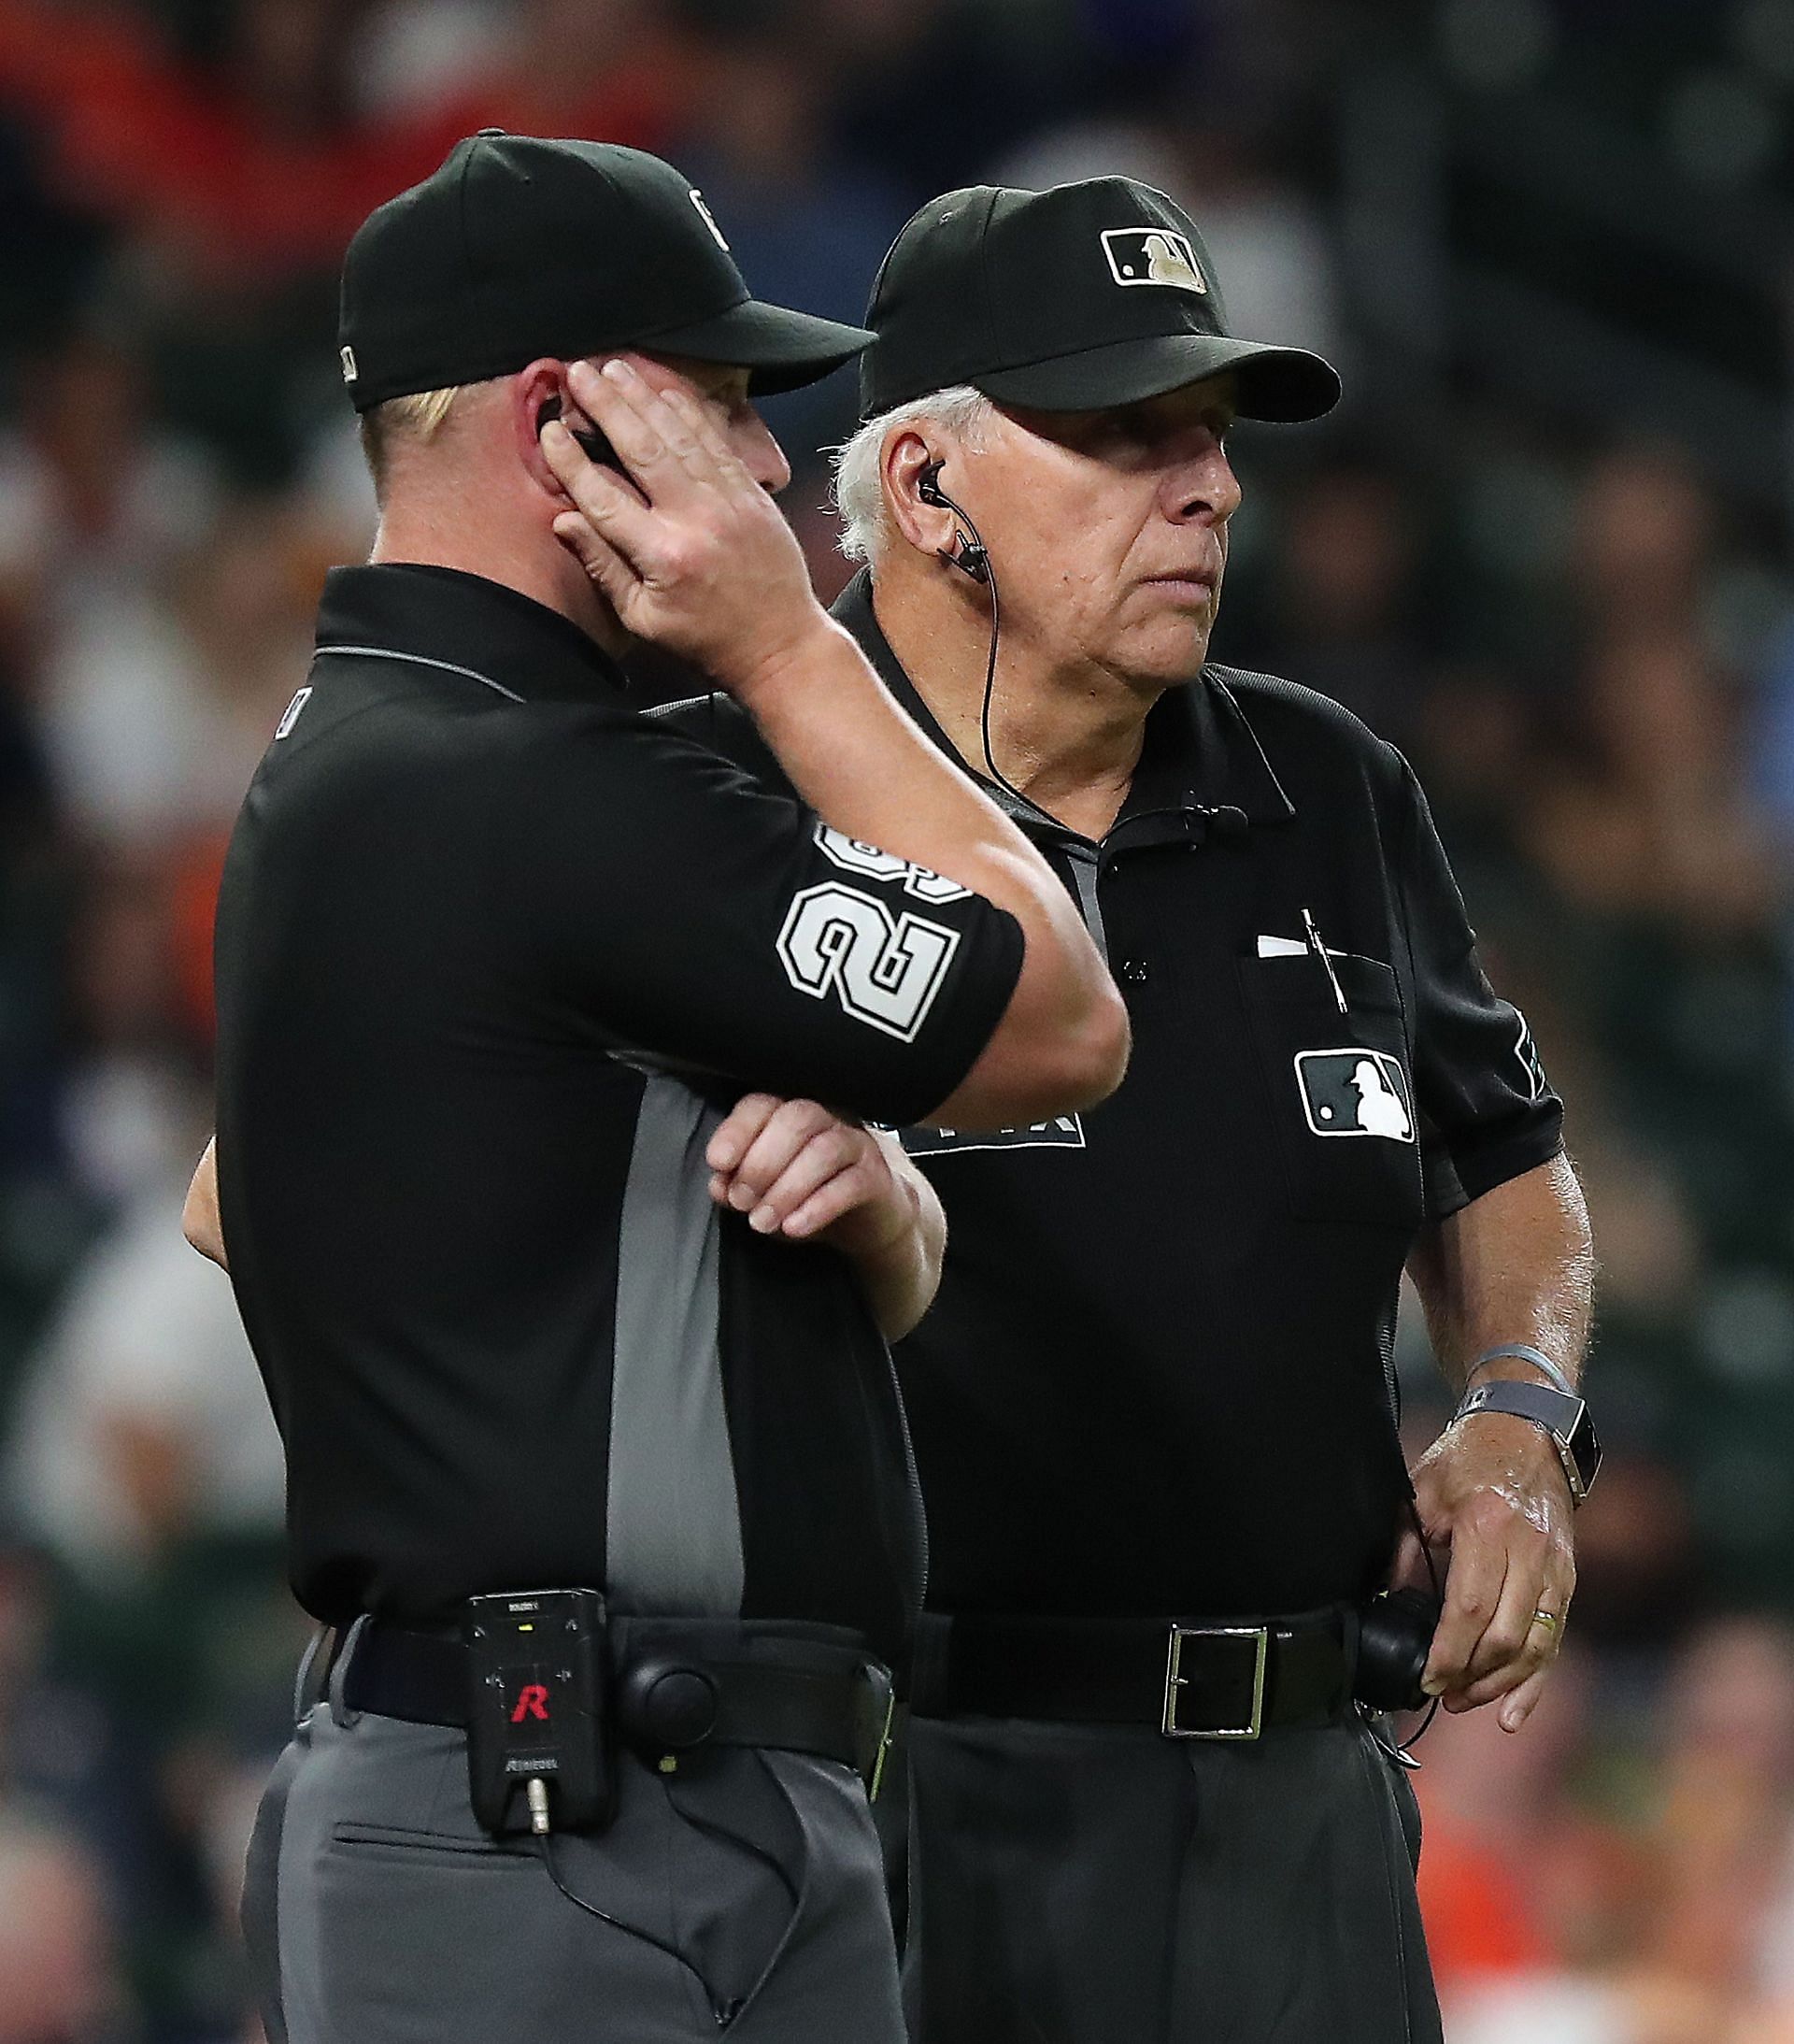 MLB umpires on planes with teams How could that possibly go wrong   Federal Baseball